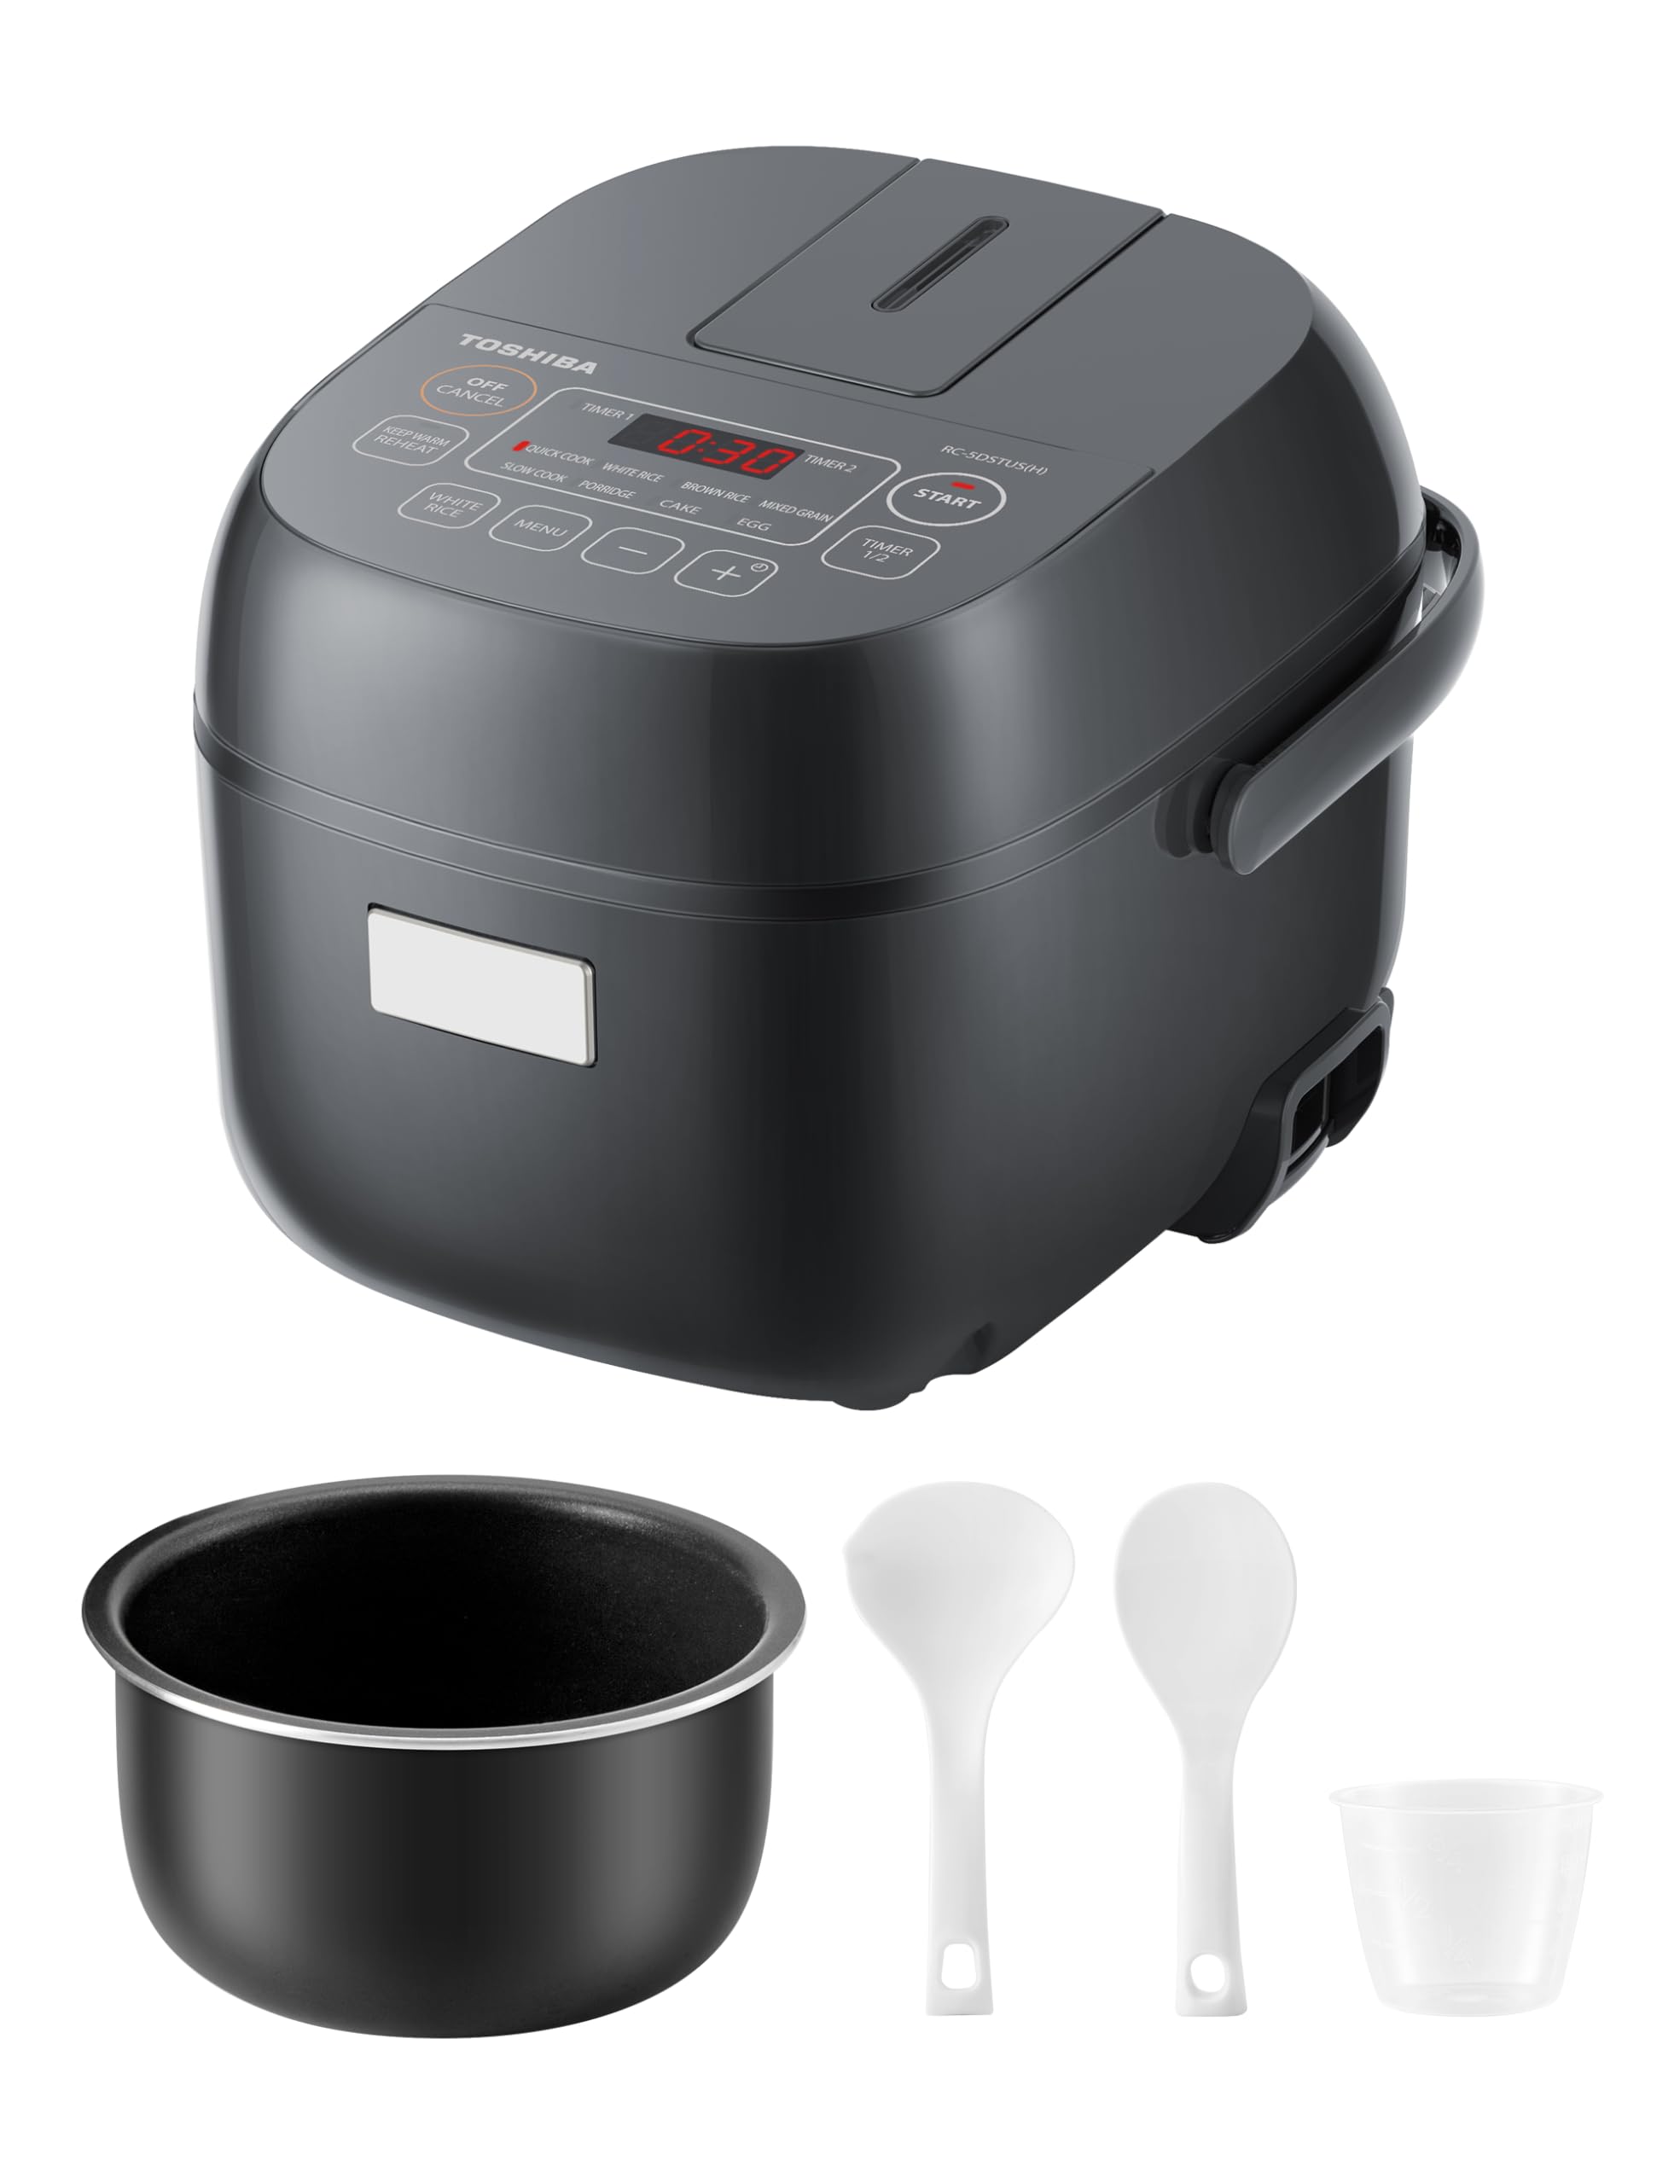 TOSHIBA Rice Cooker Small 3-Cup Uncooked– LCD Display with 8 Cooking Functions $79.99